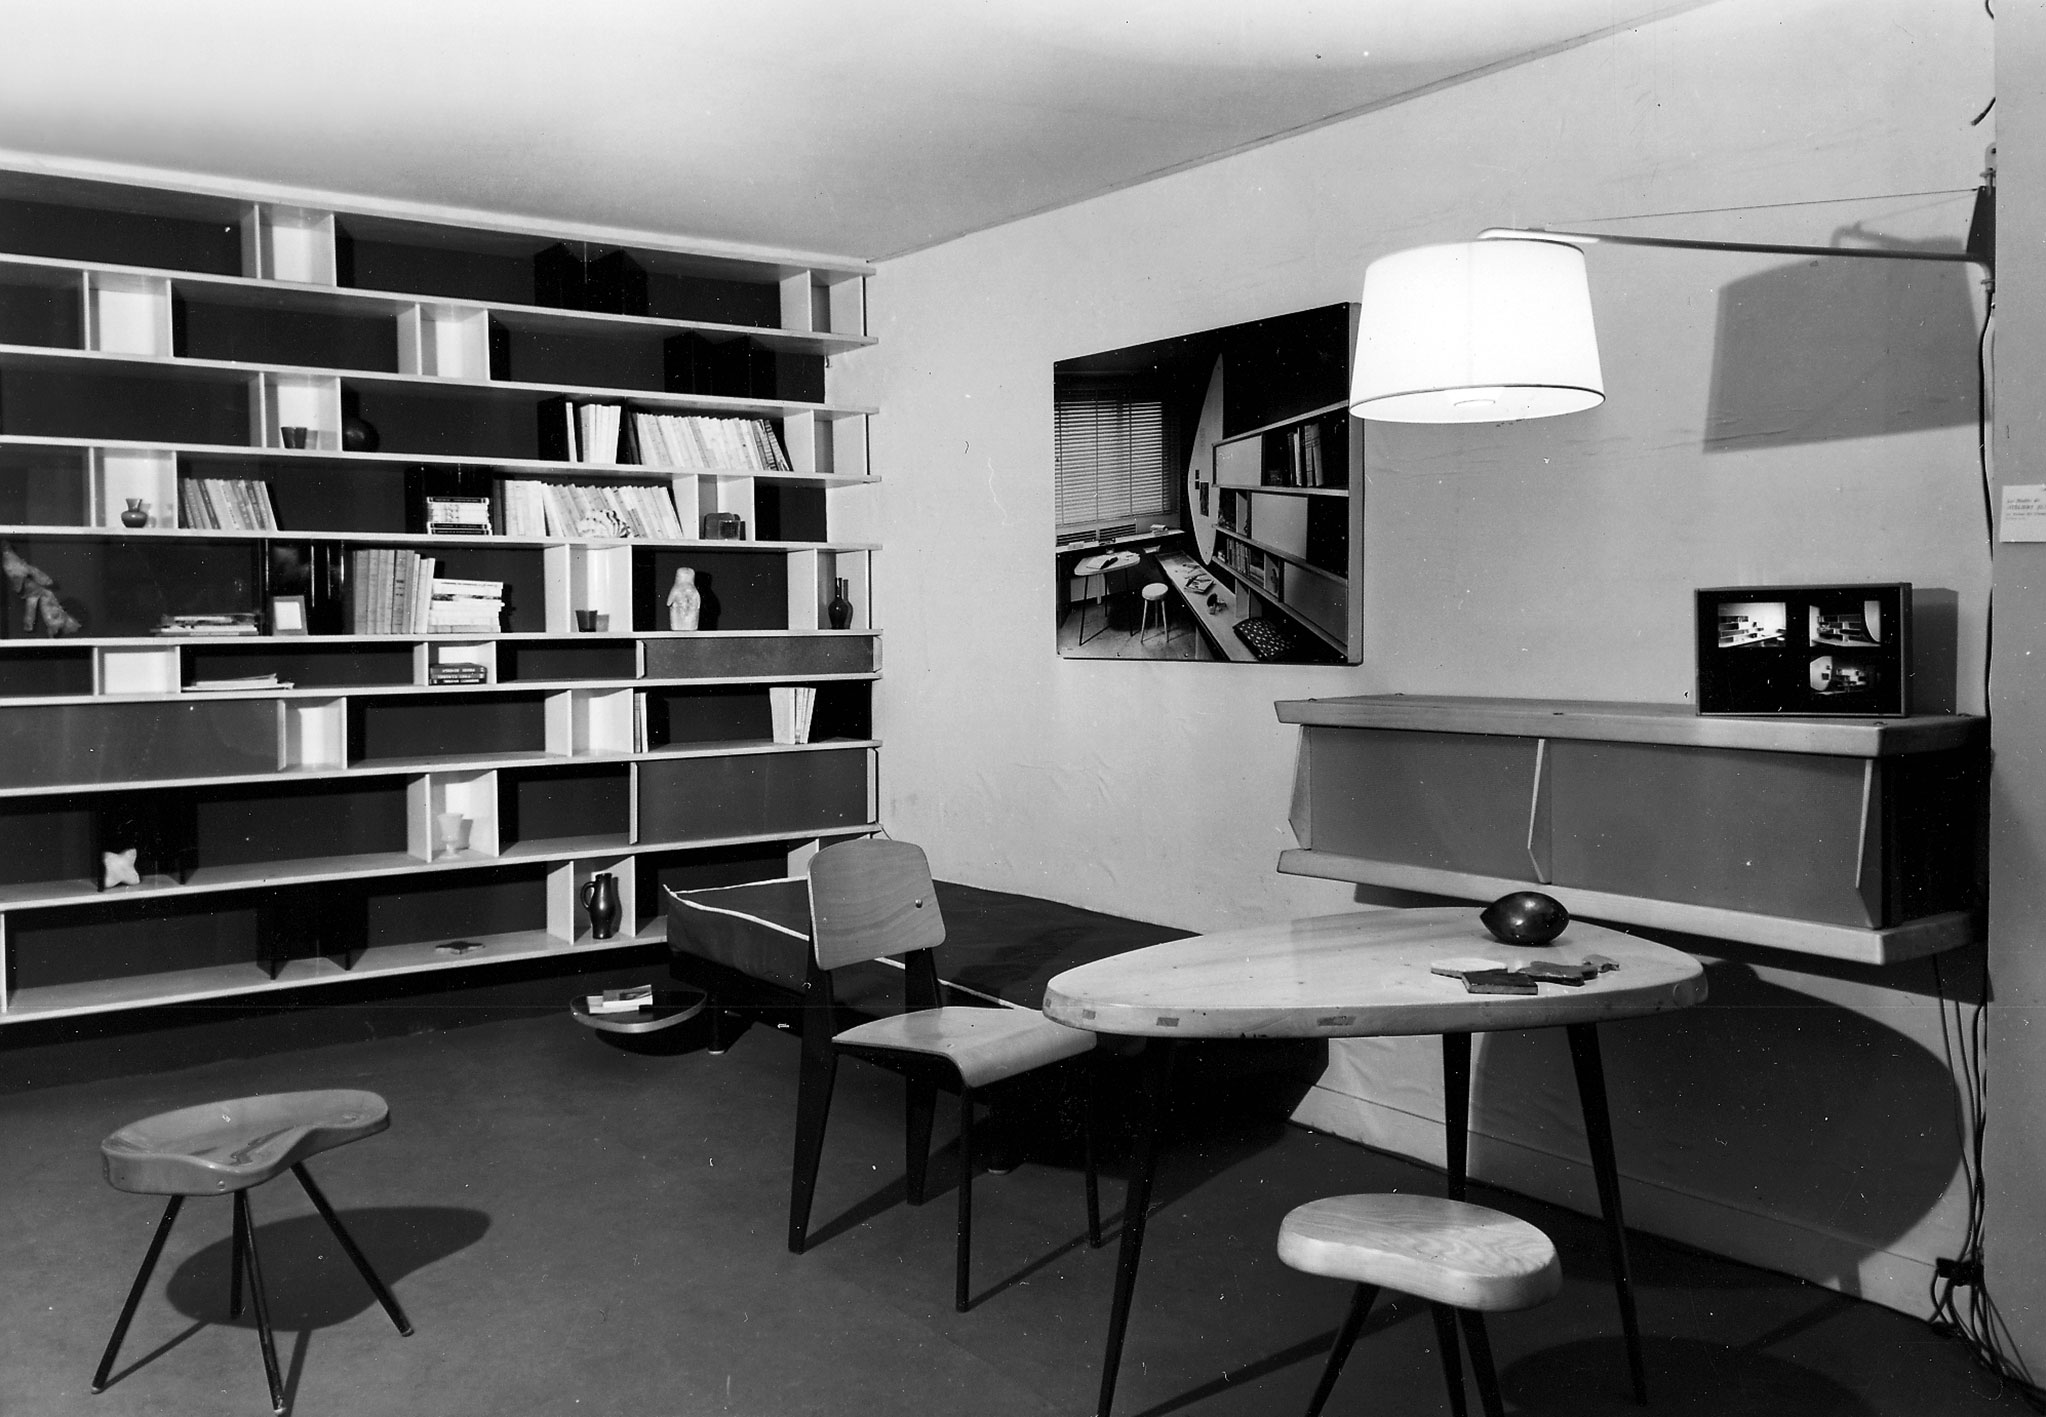 Ateliers Jean Prouvé booth at the Salon des Arts Ménagers, 1953. Scenography by Charlotte Perriand. Furniture by Jean Prouvé: Métropole no. 305 chair, stool no. 307, swing-jib lamp, SCAL no. 450 bed (with a swiveling tablet by Charlotte Perriand). Furniture by Charlotte Perriand: large bookcase, free form table from the Maison du Mexique, free form stool, wall storage unit.